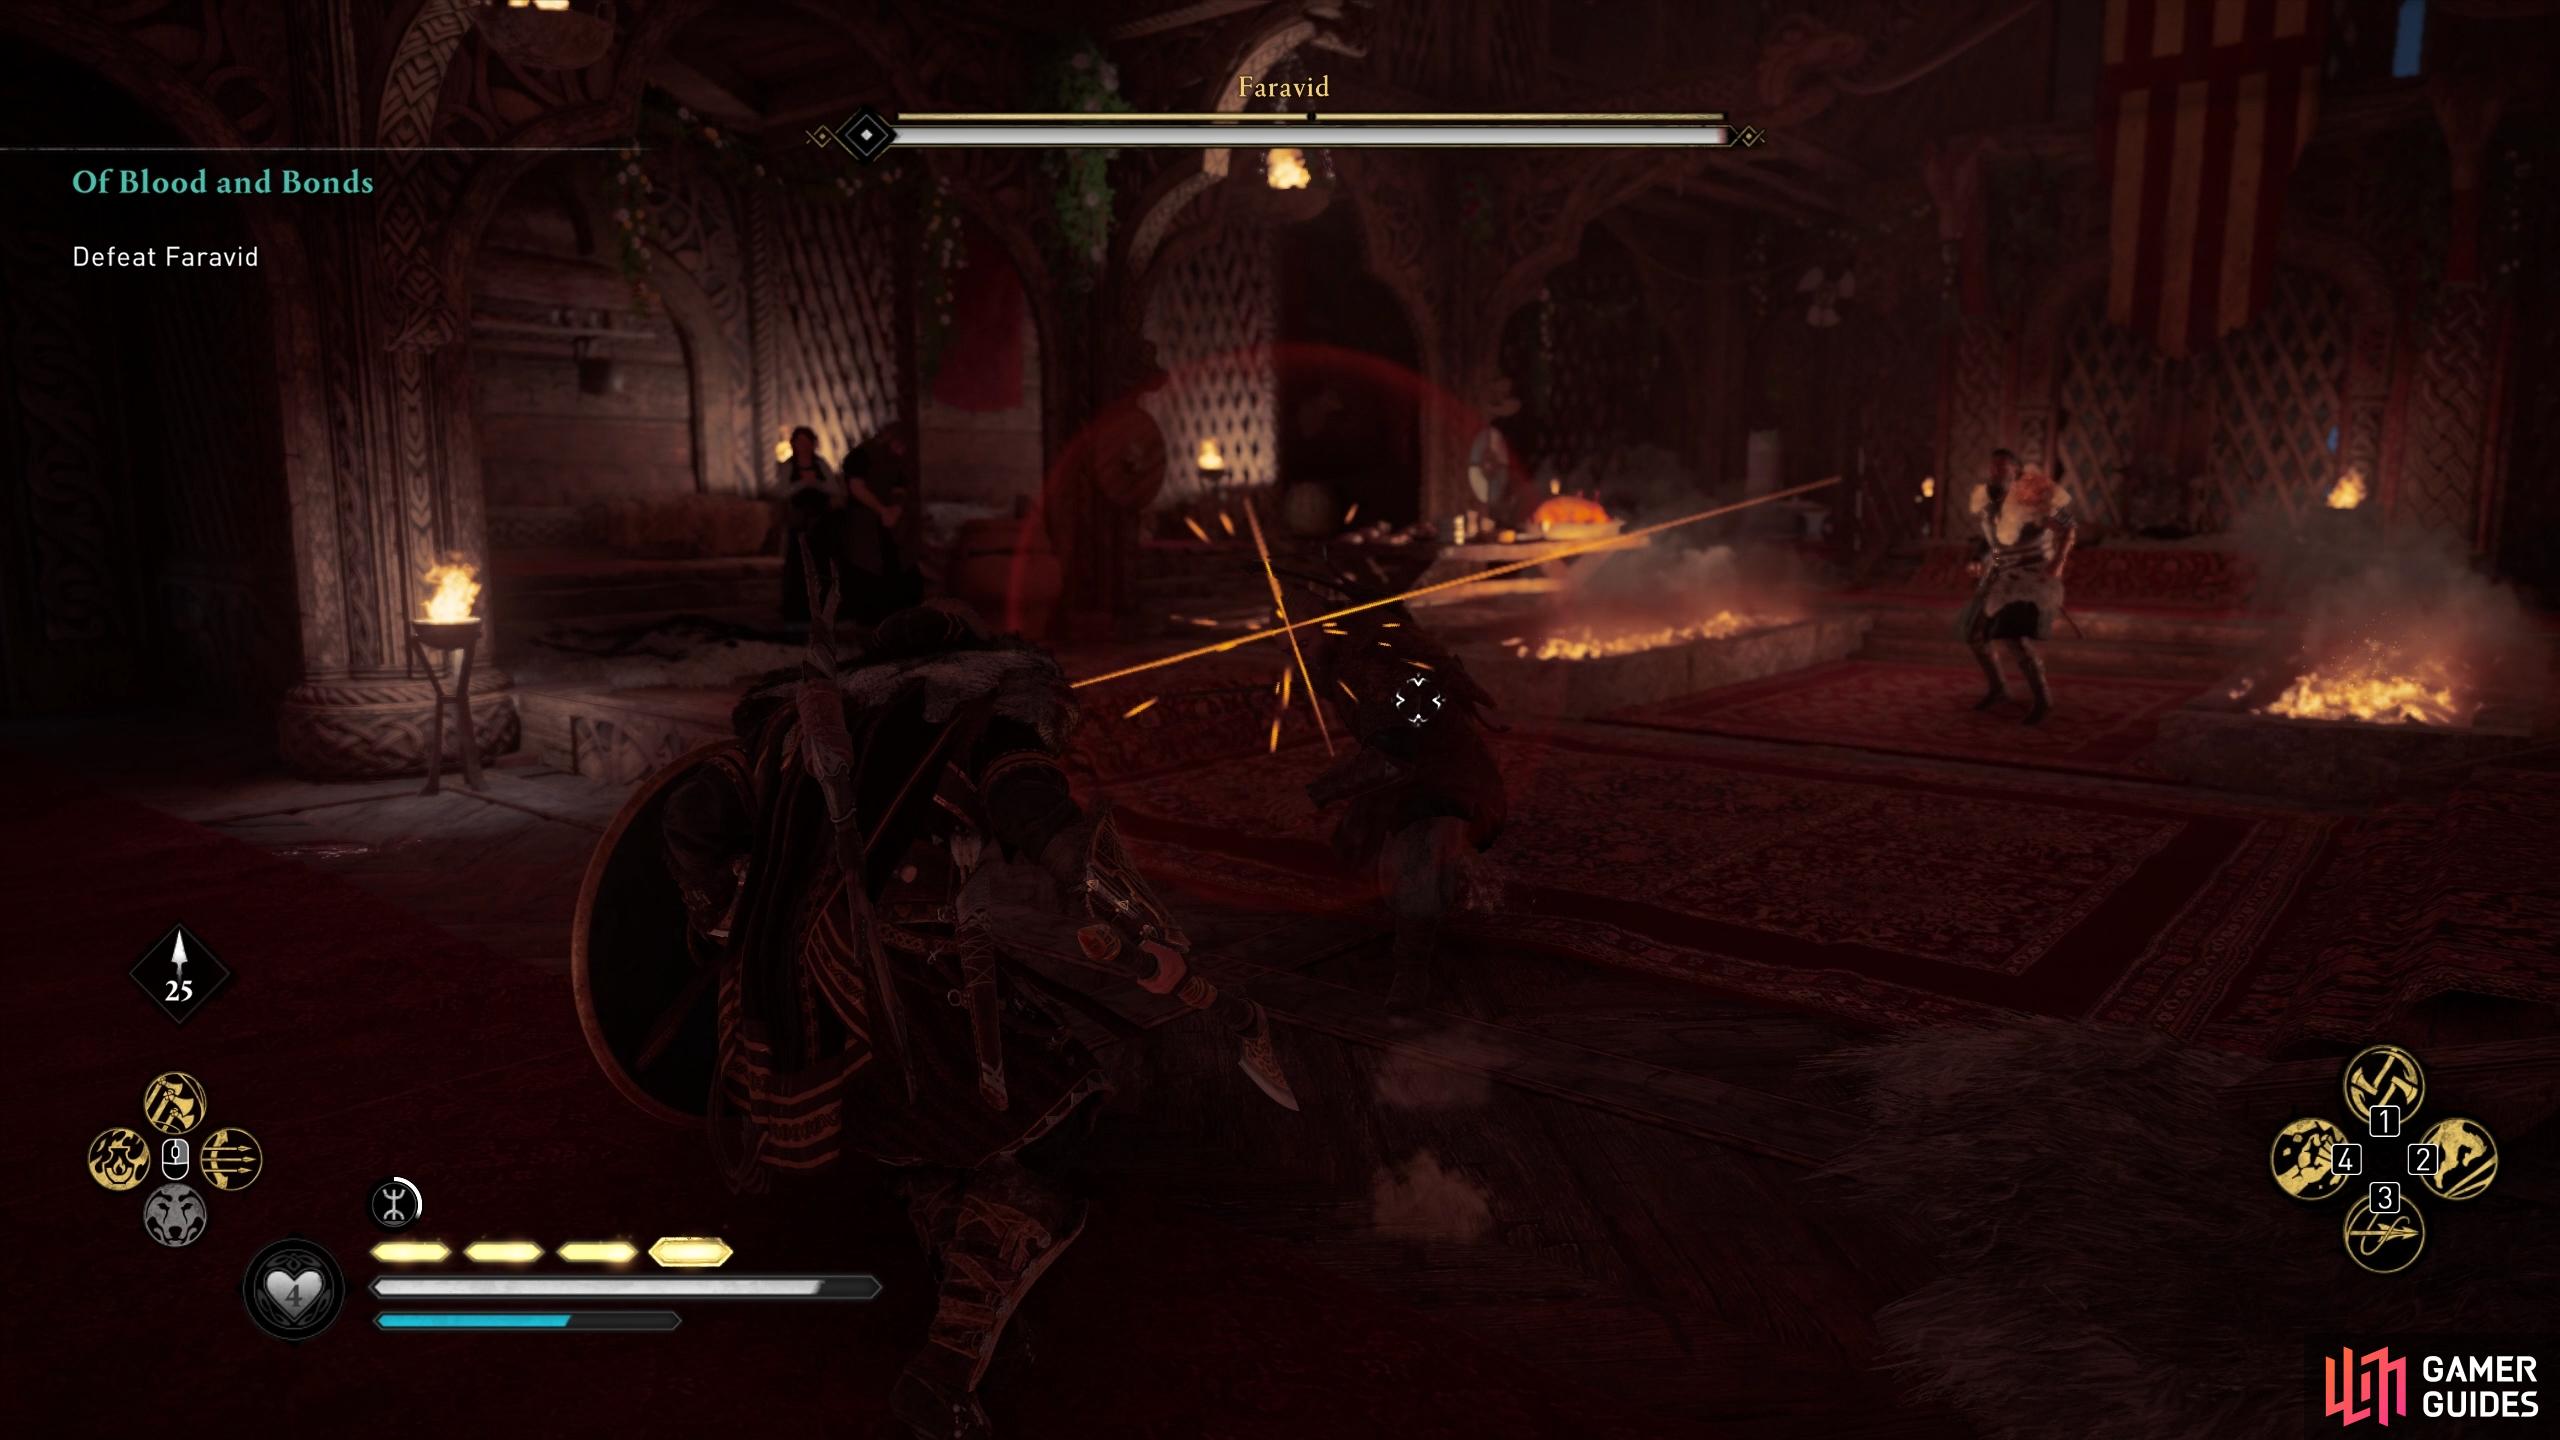 You can parry or block Faravid's regular yellow or orange strikes.